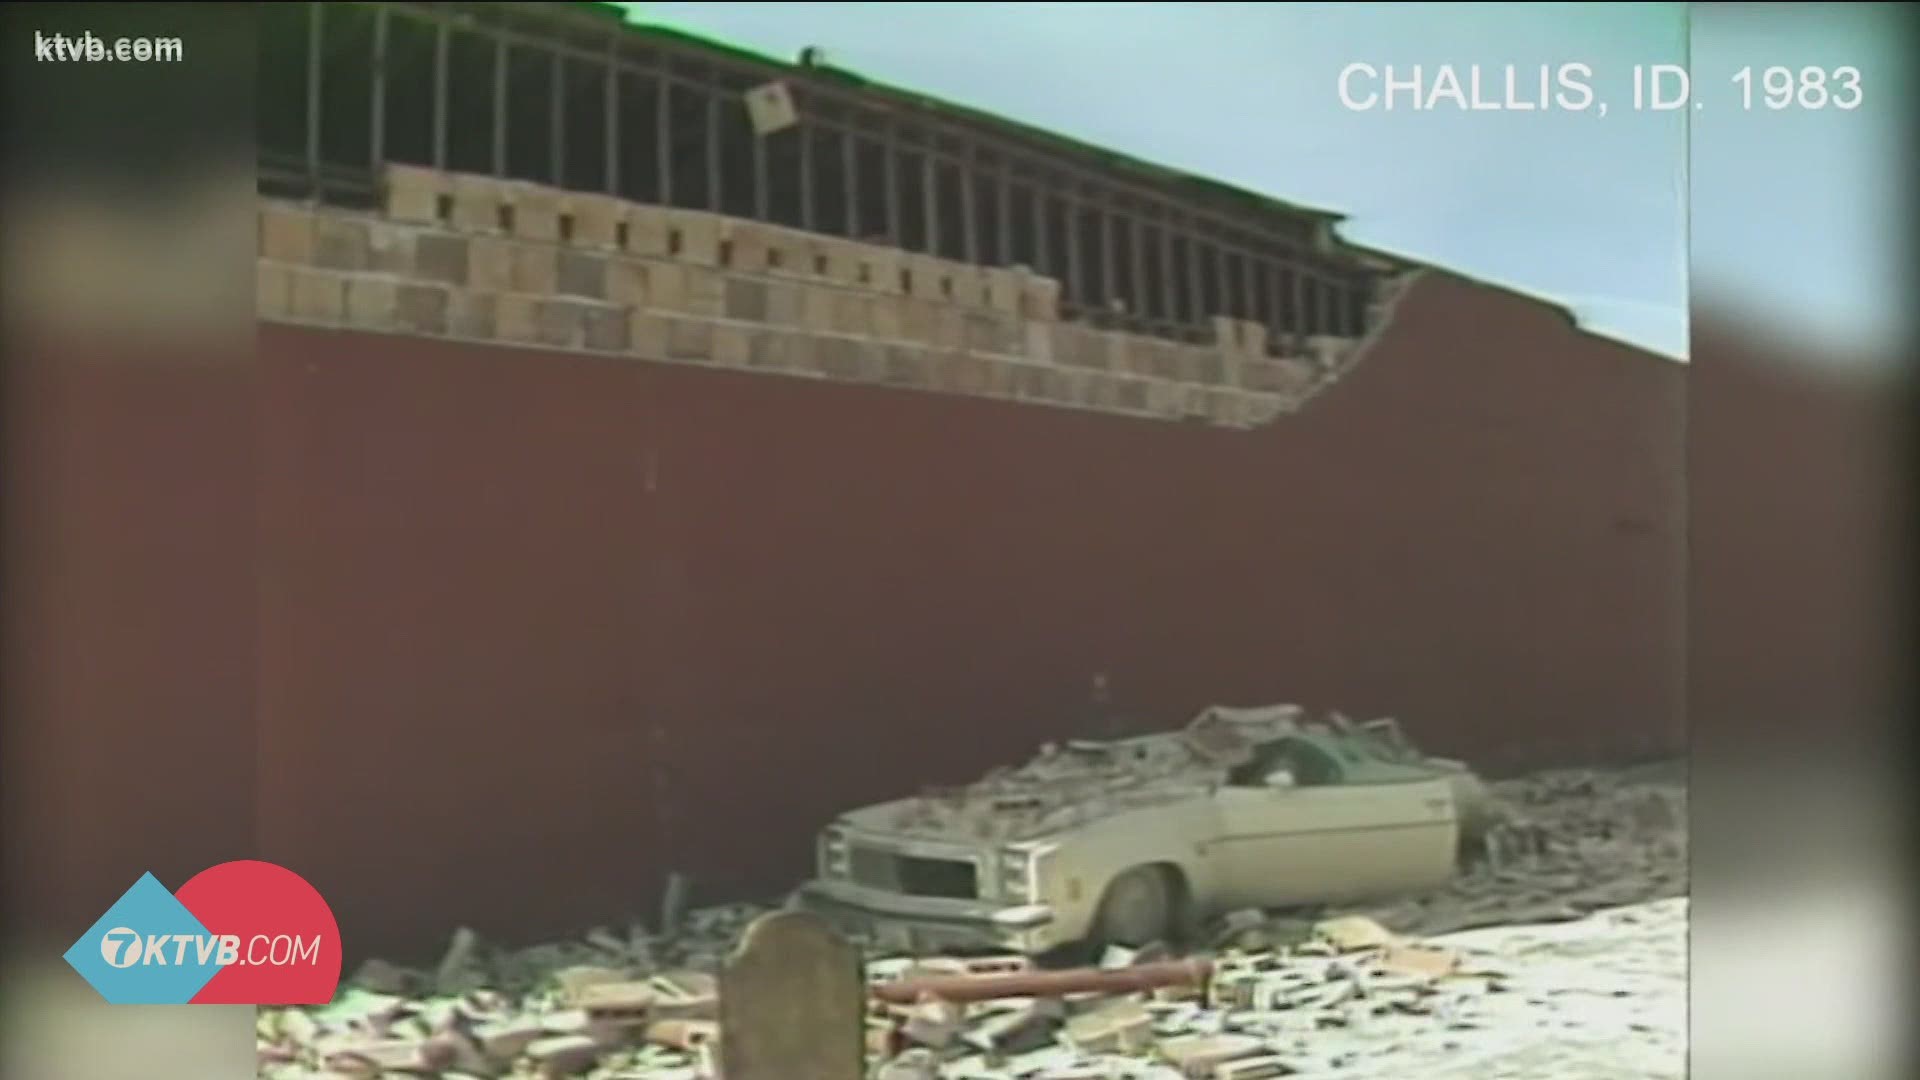 The giant temblor was felt across the region. Two children died in the quake.